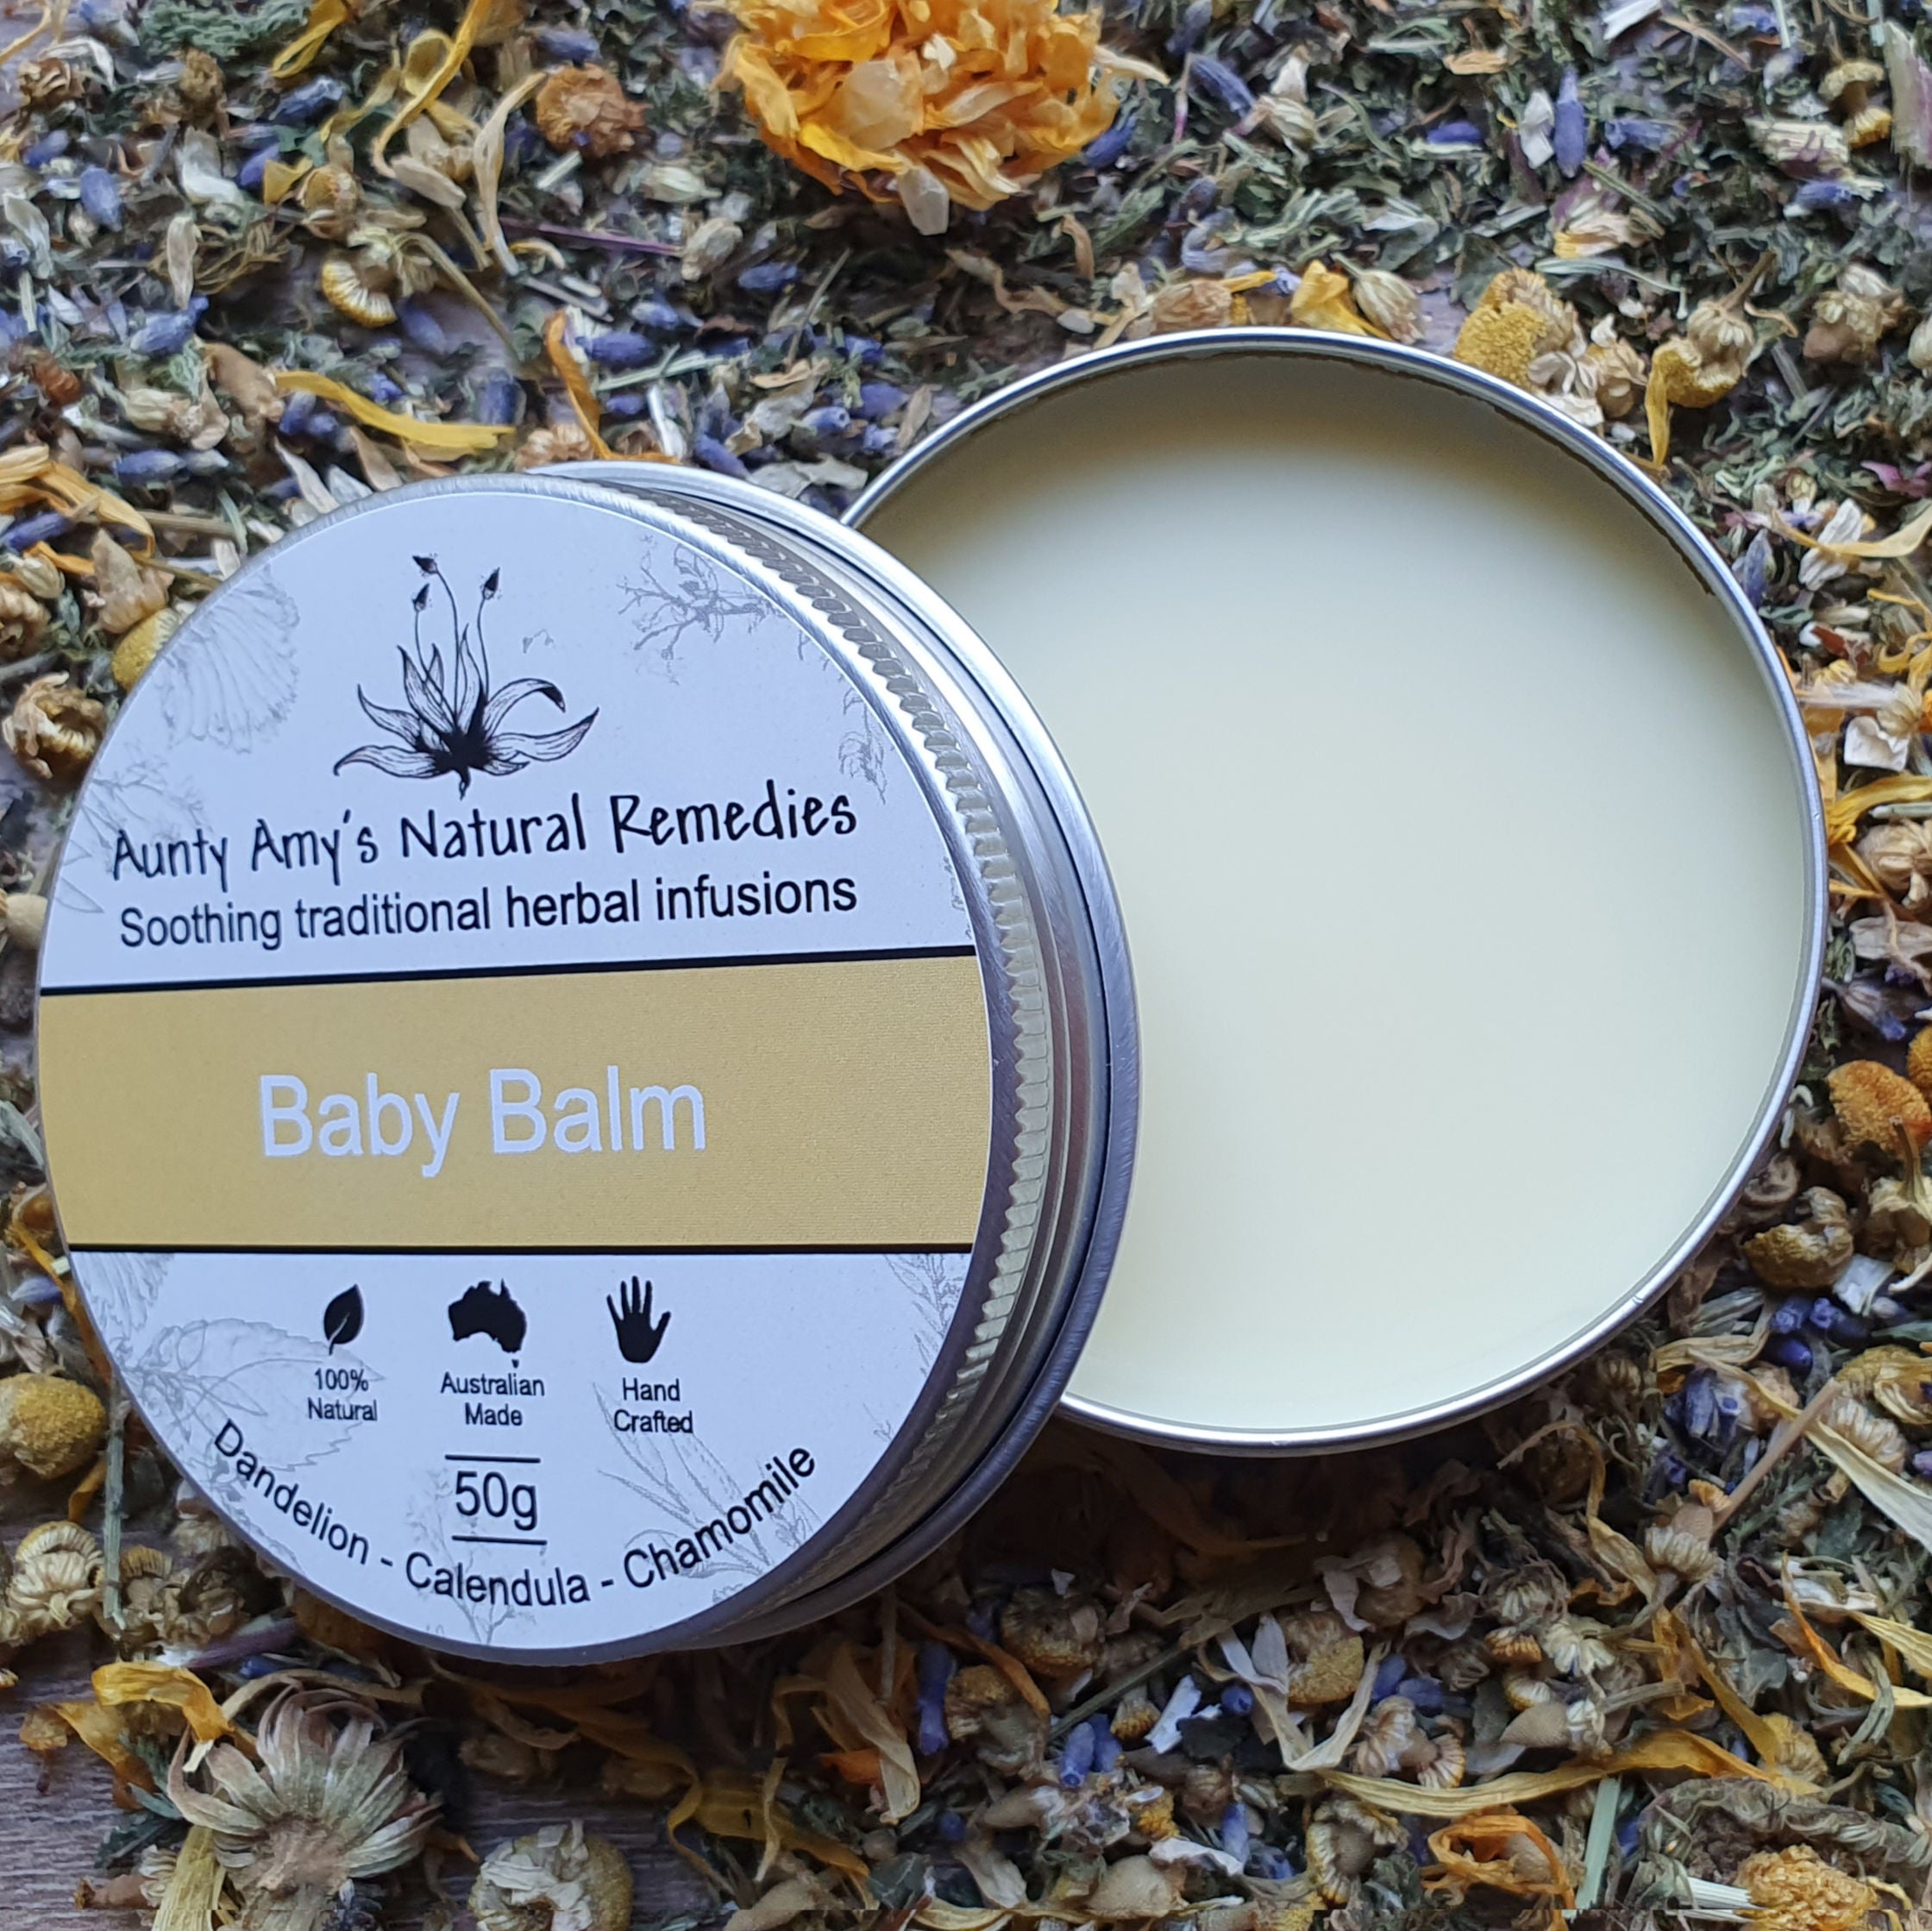 Aunty Amys - Natural Remedies Baby Balm